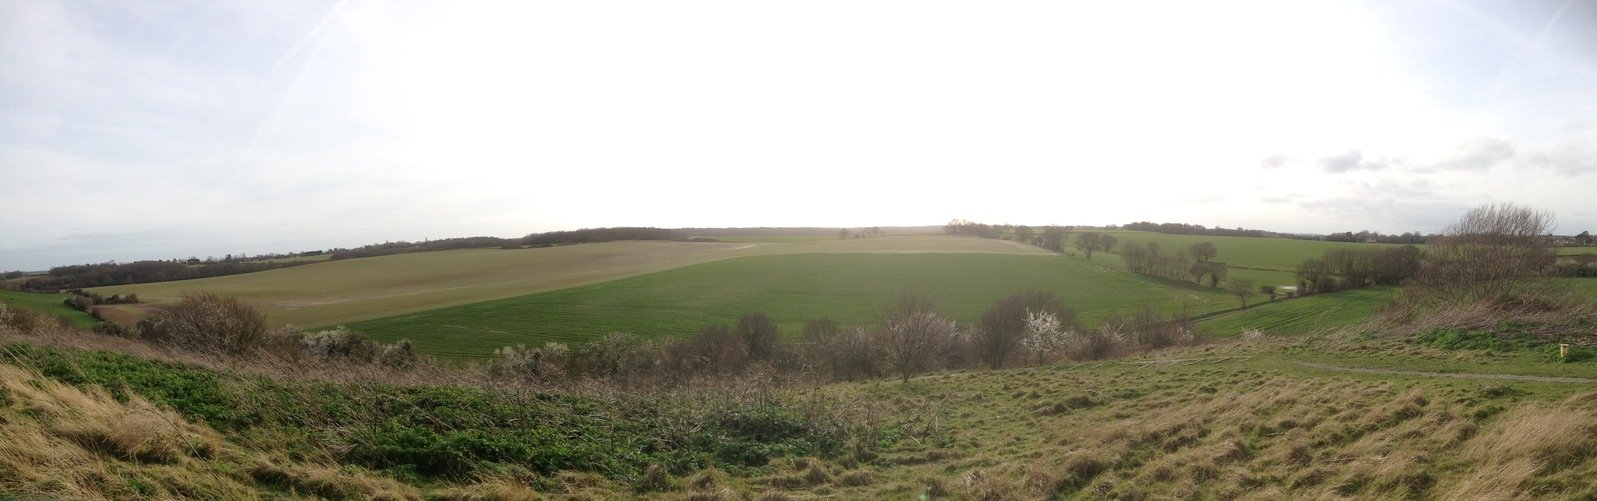 an empty field in the country with very green grass